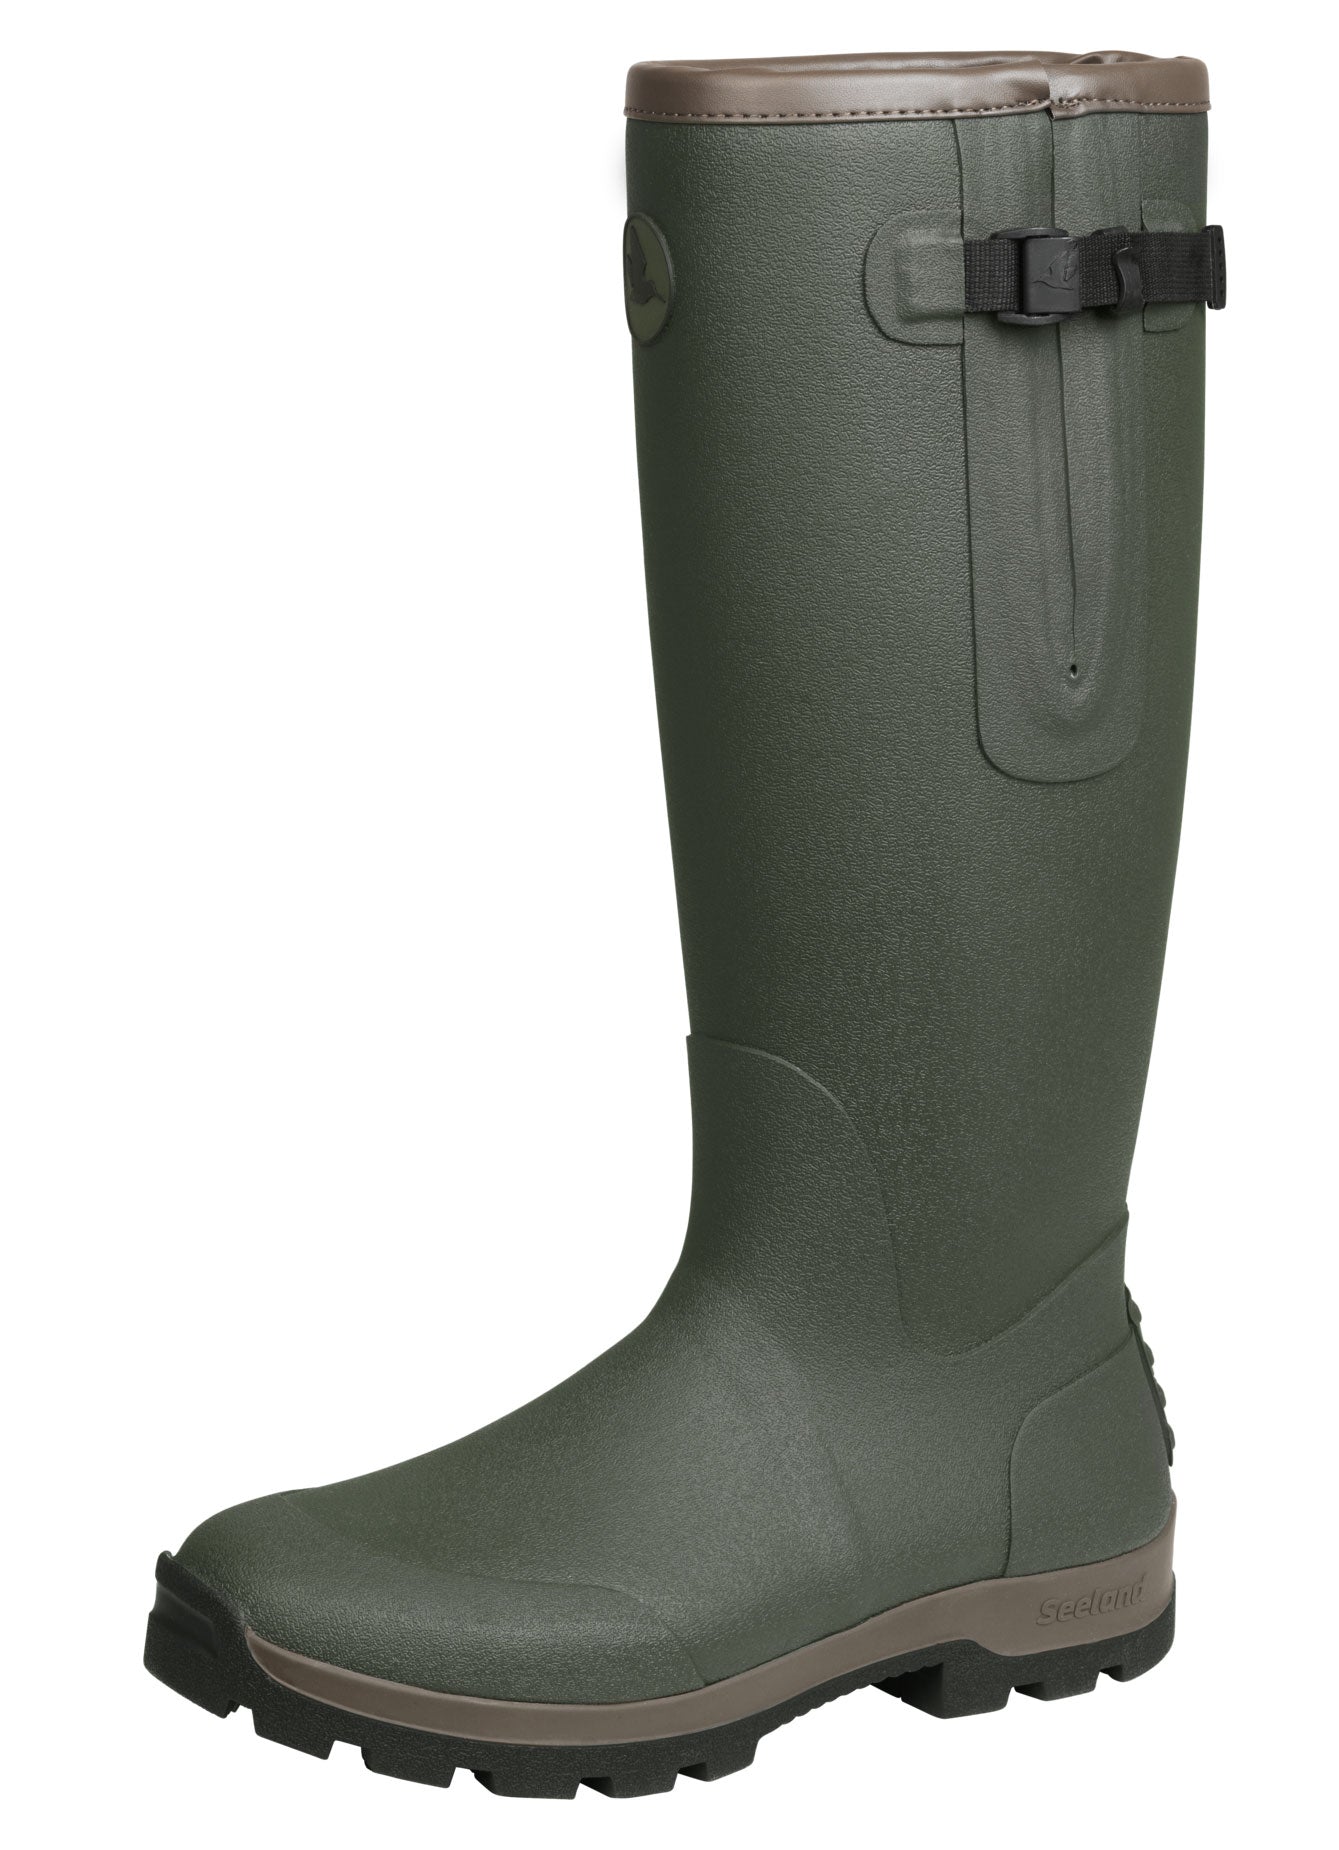 Seeland Noble Gusset Insulated Wellington Boot